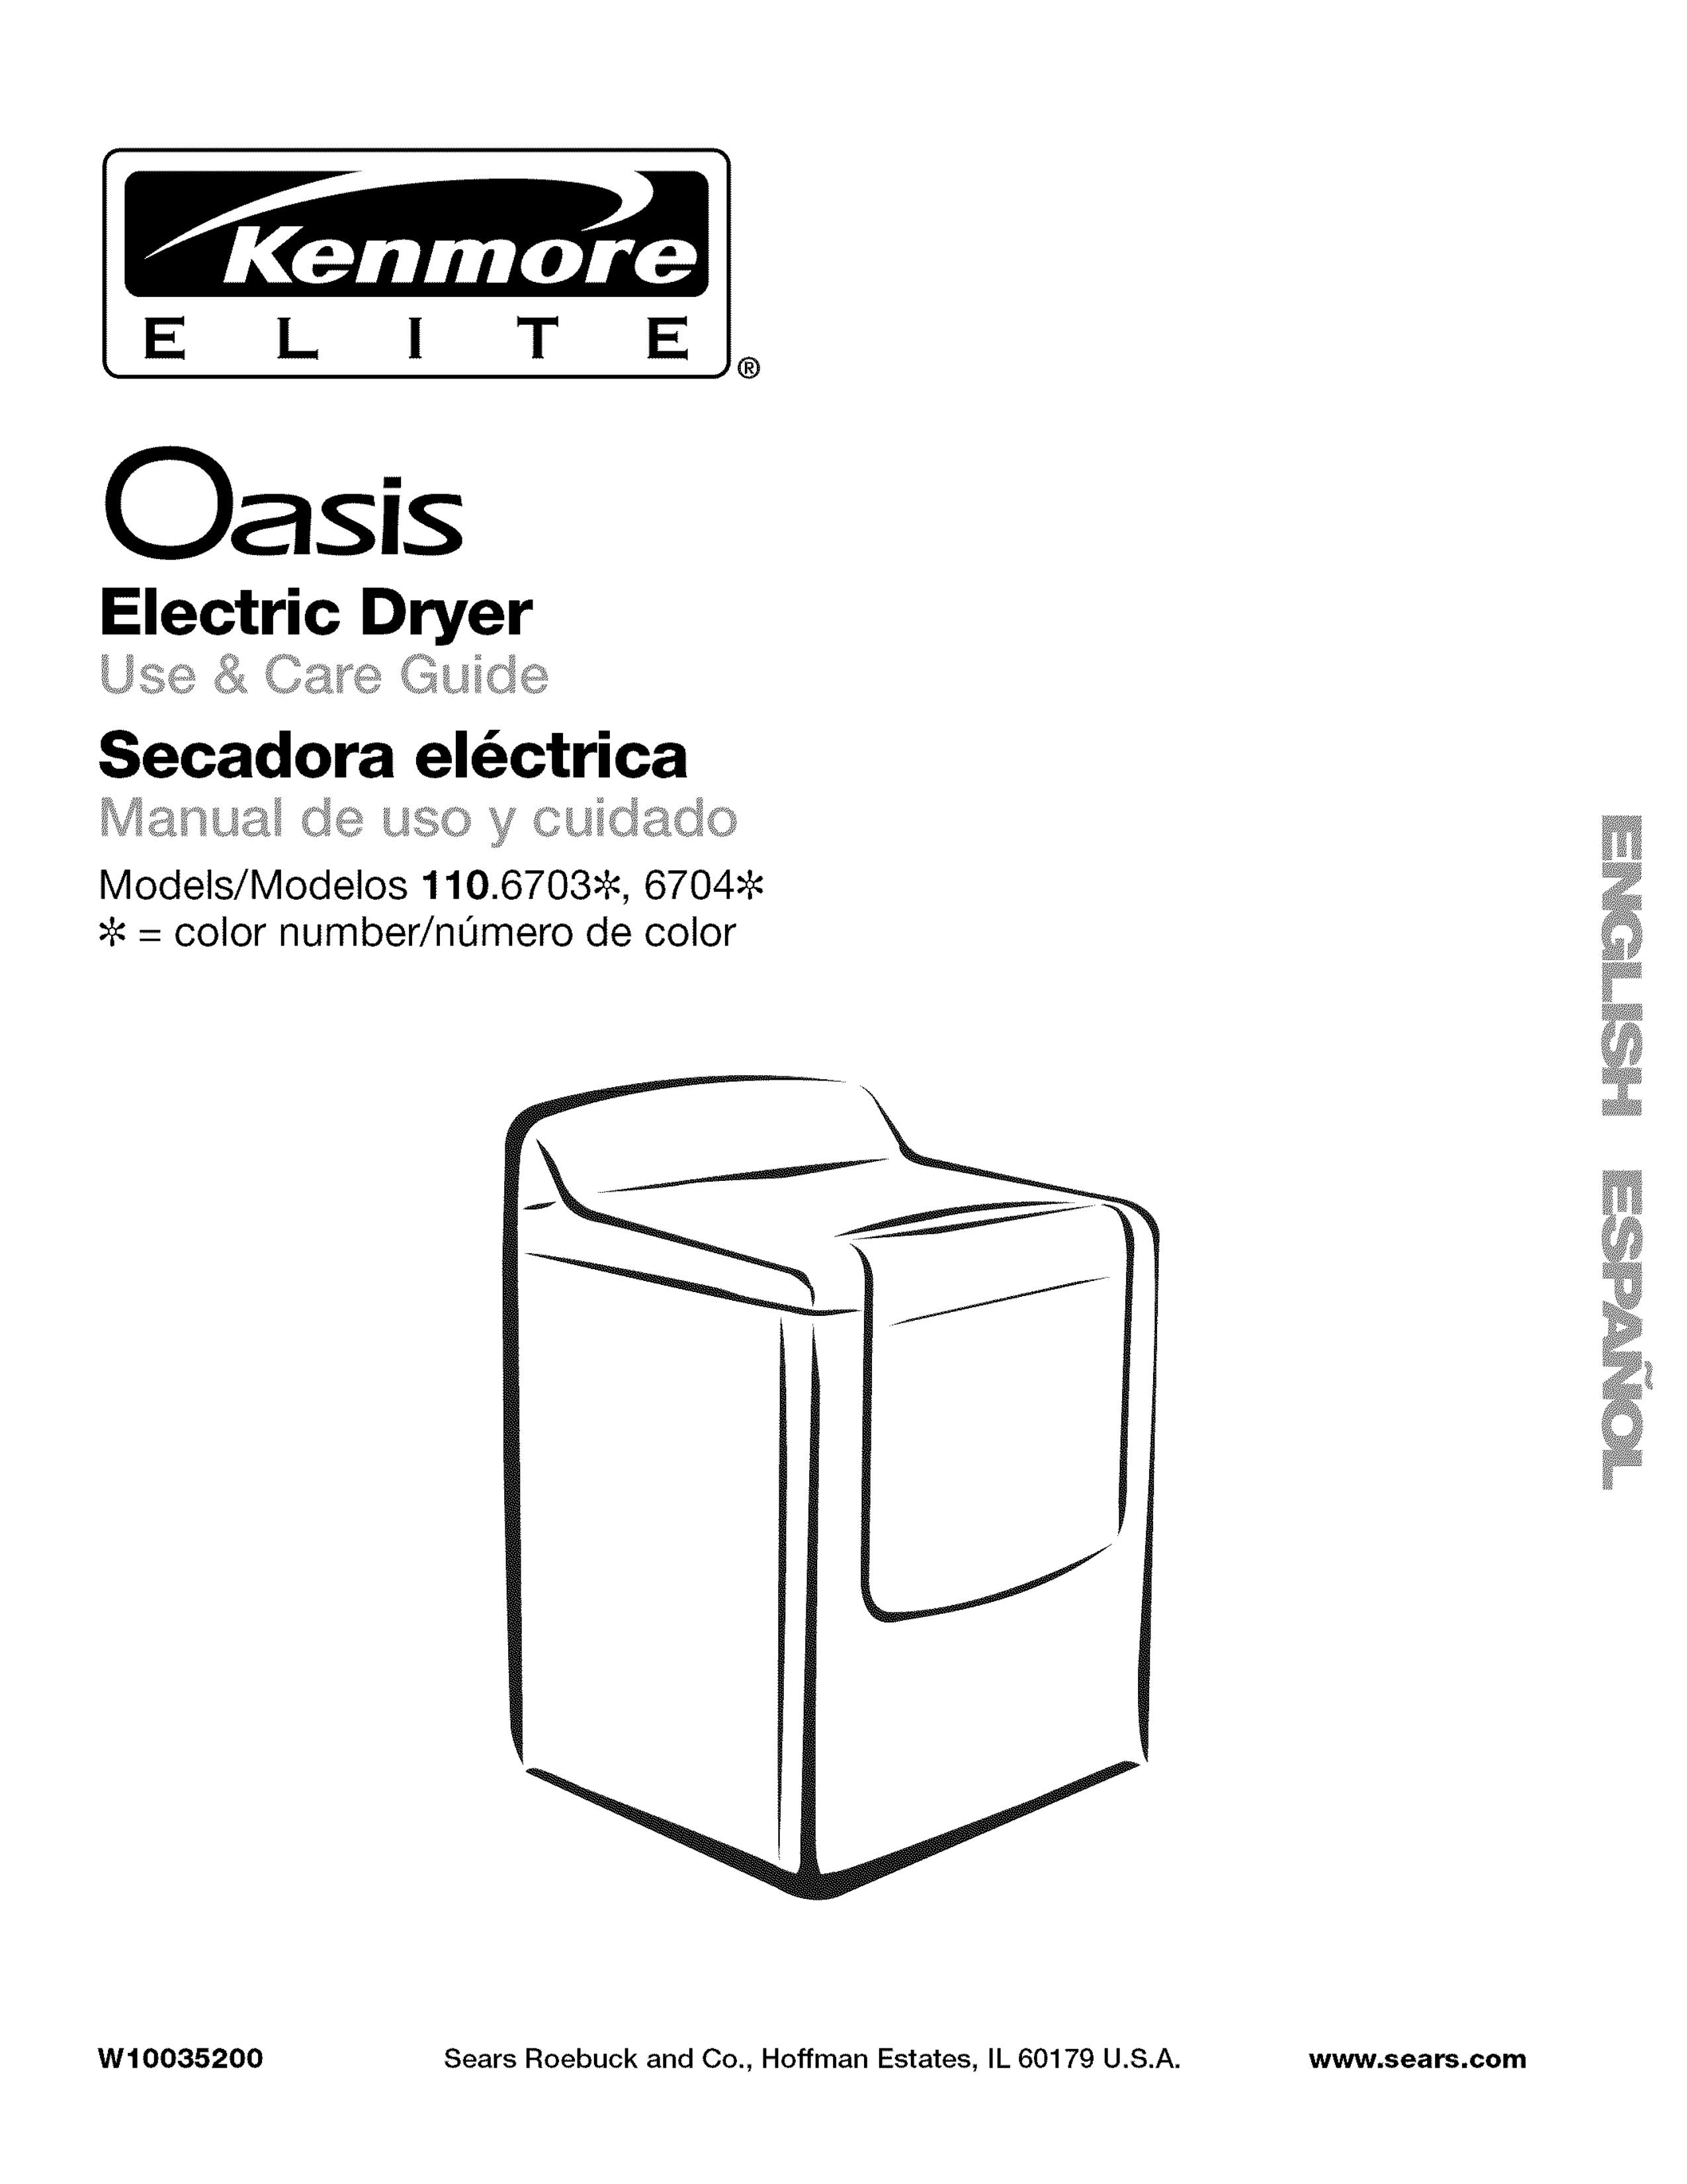 Kenmore 110.6704 Clothes Dryer User Manual